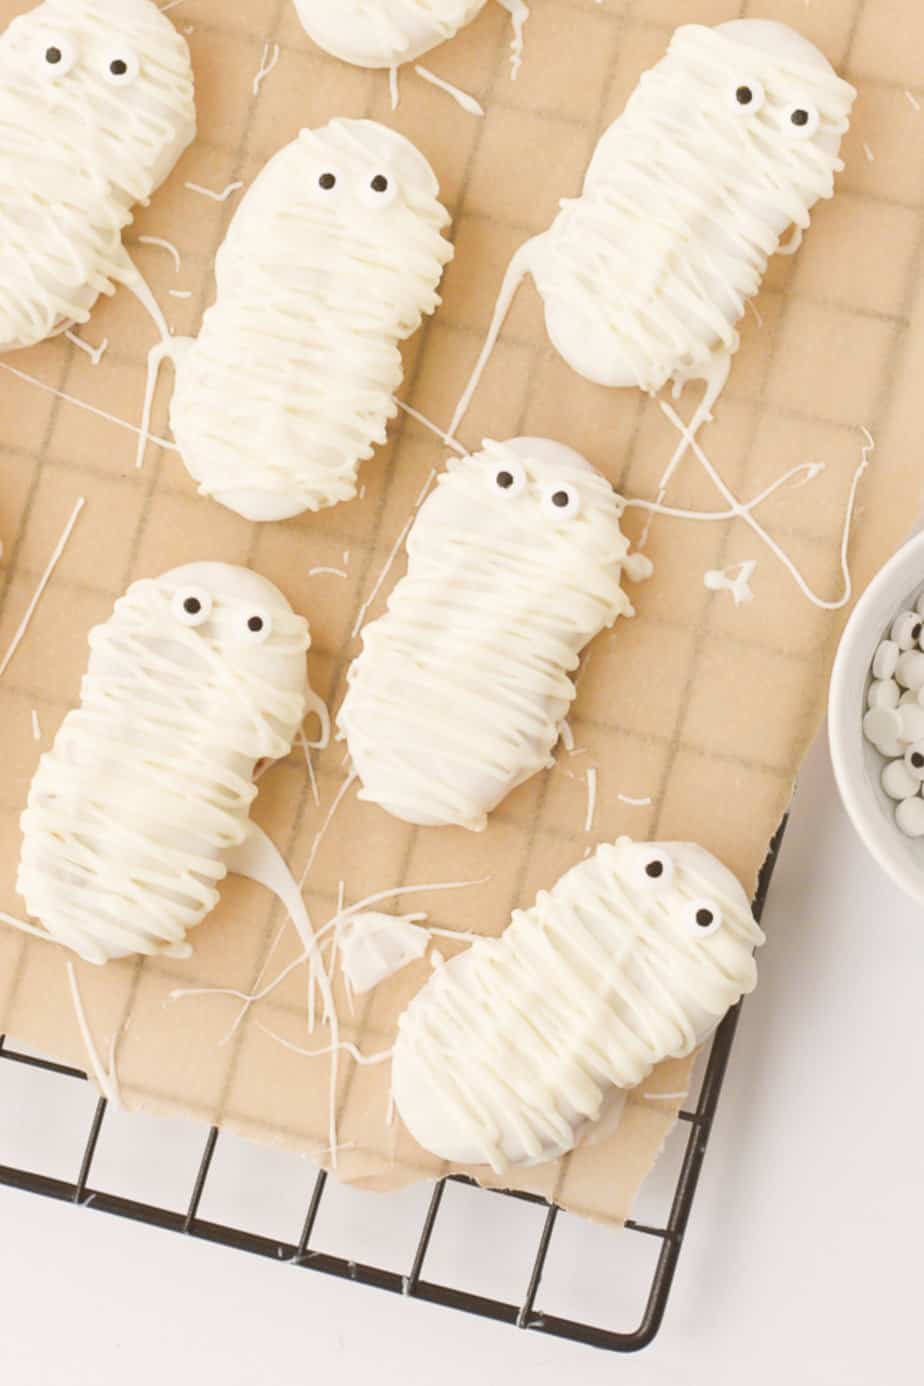 Nutter Butter cookies dipped in white chocolate and decorated to look like mummies with candy eyes cooling on a wire rack covered in parchment paper.